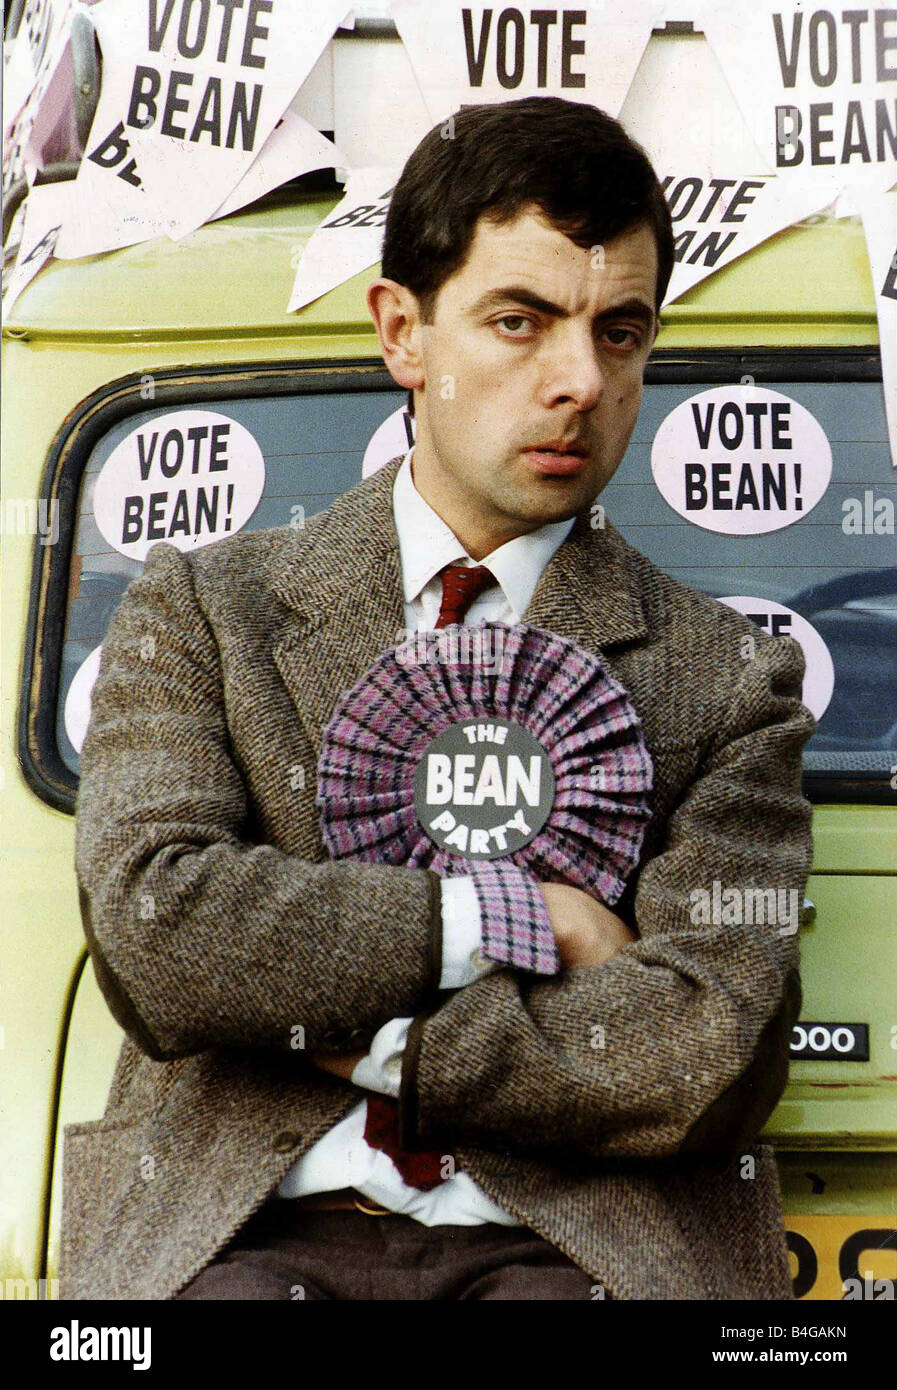 Rowan Atkinson Actor as Mr Bean in his comic relief Vote Bean Party Stock Photo